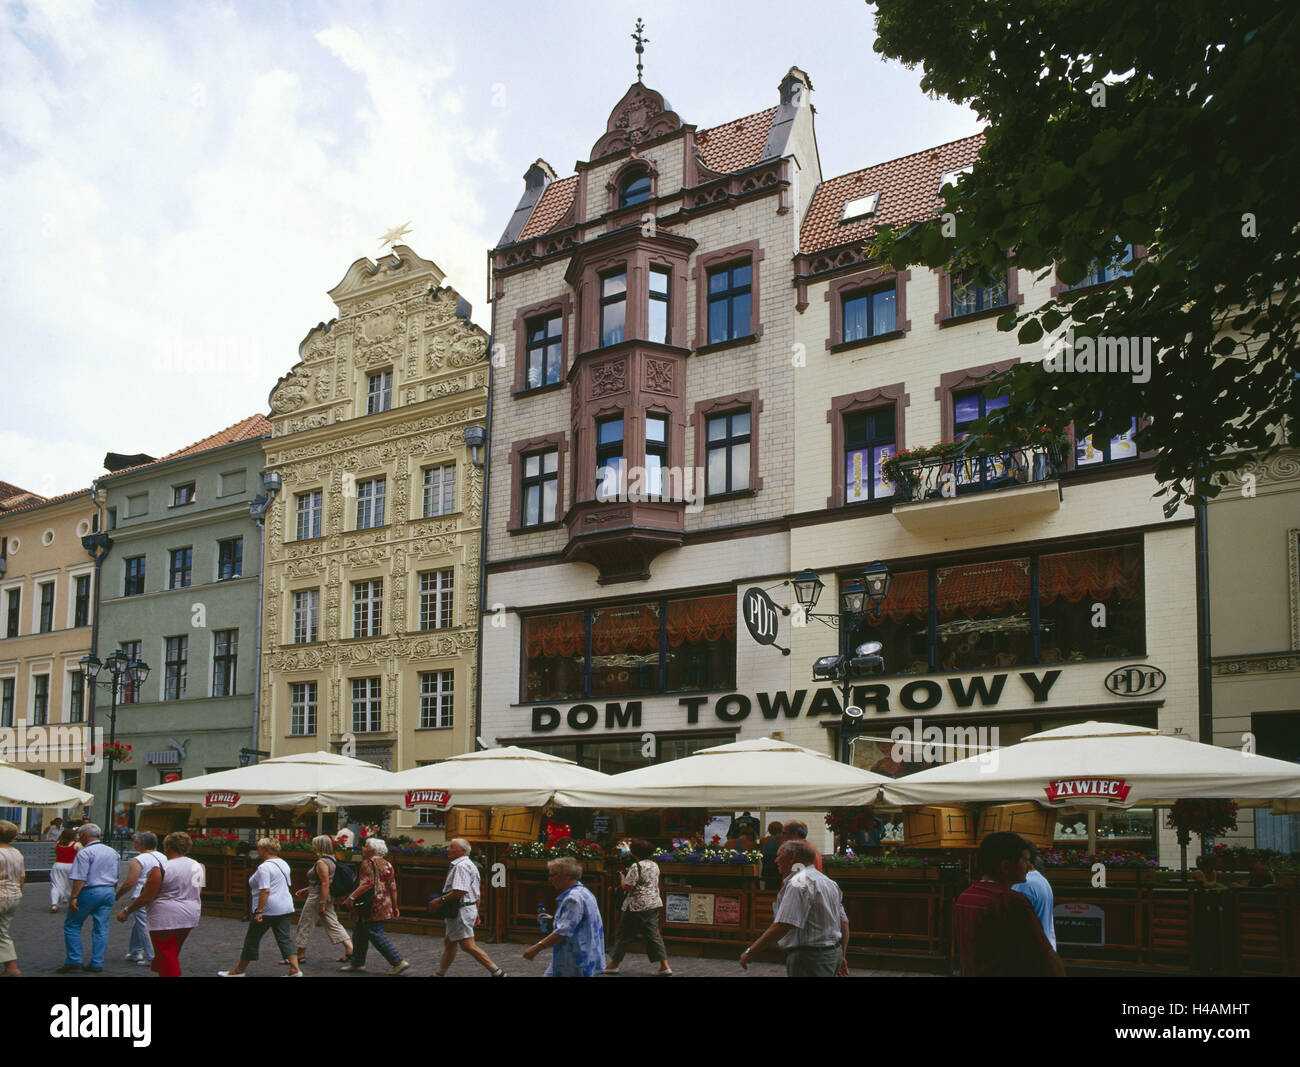 Poland, Thorn, Old Town, department store, street cafe, passer-by, Kujawien Pomerania, town, place of interest, building, architecture, UNESCO-world cultural heritage, person, tourist, tourism, houses, facades, cafe, display screens, sunshades, pedestrians, pedestrian area, Stock Photo